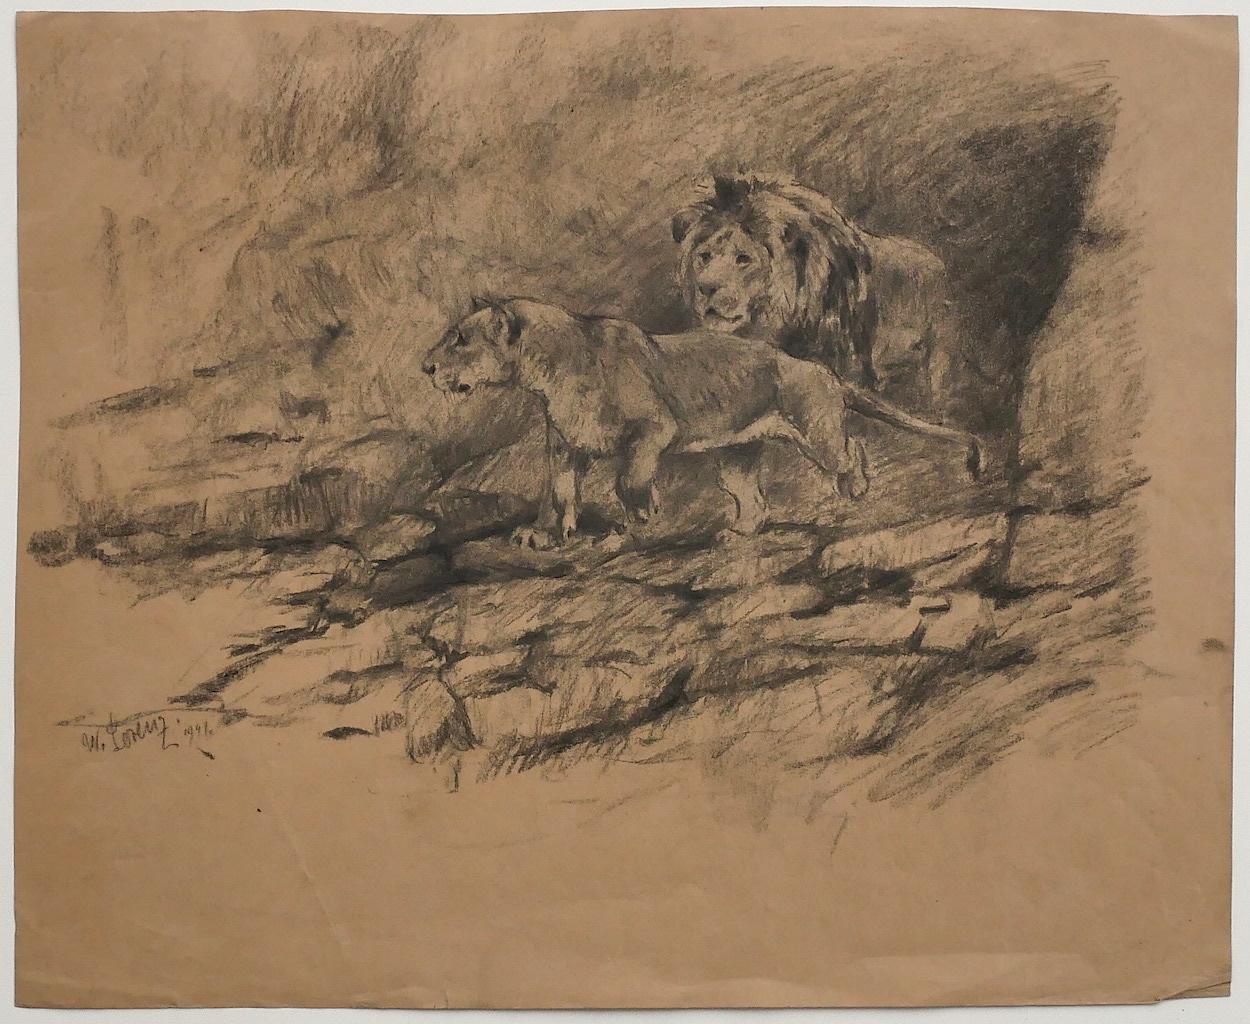 Lions - Original Pencil on Paper by Willy Lorenz - 1947